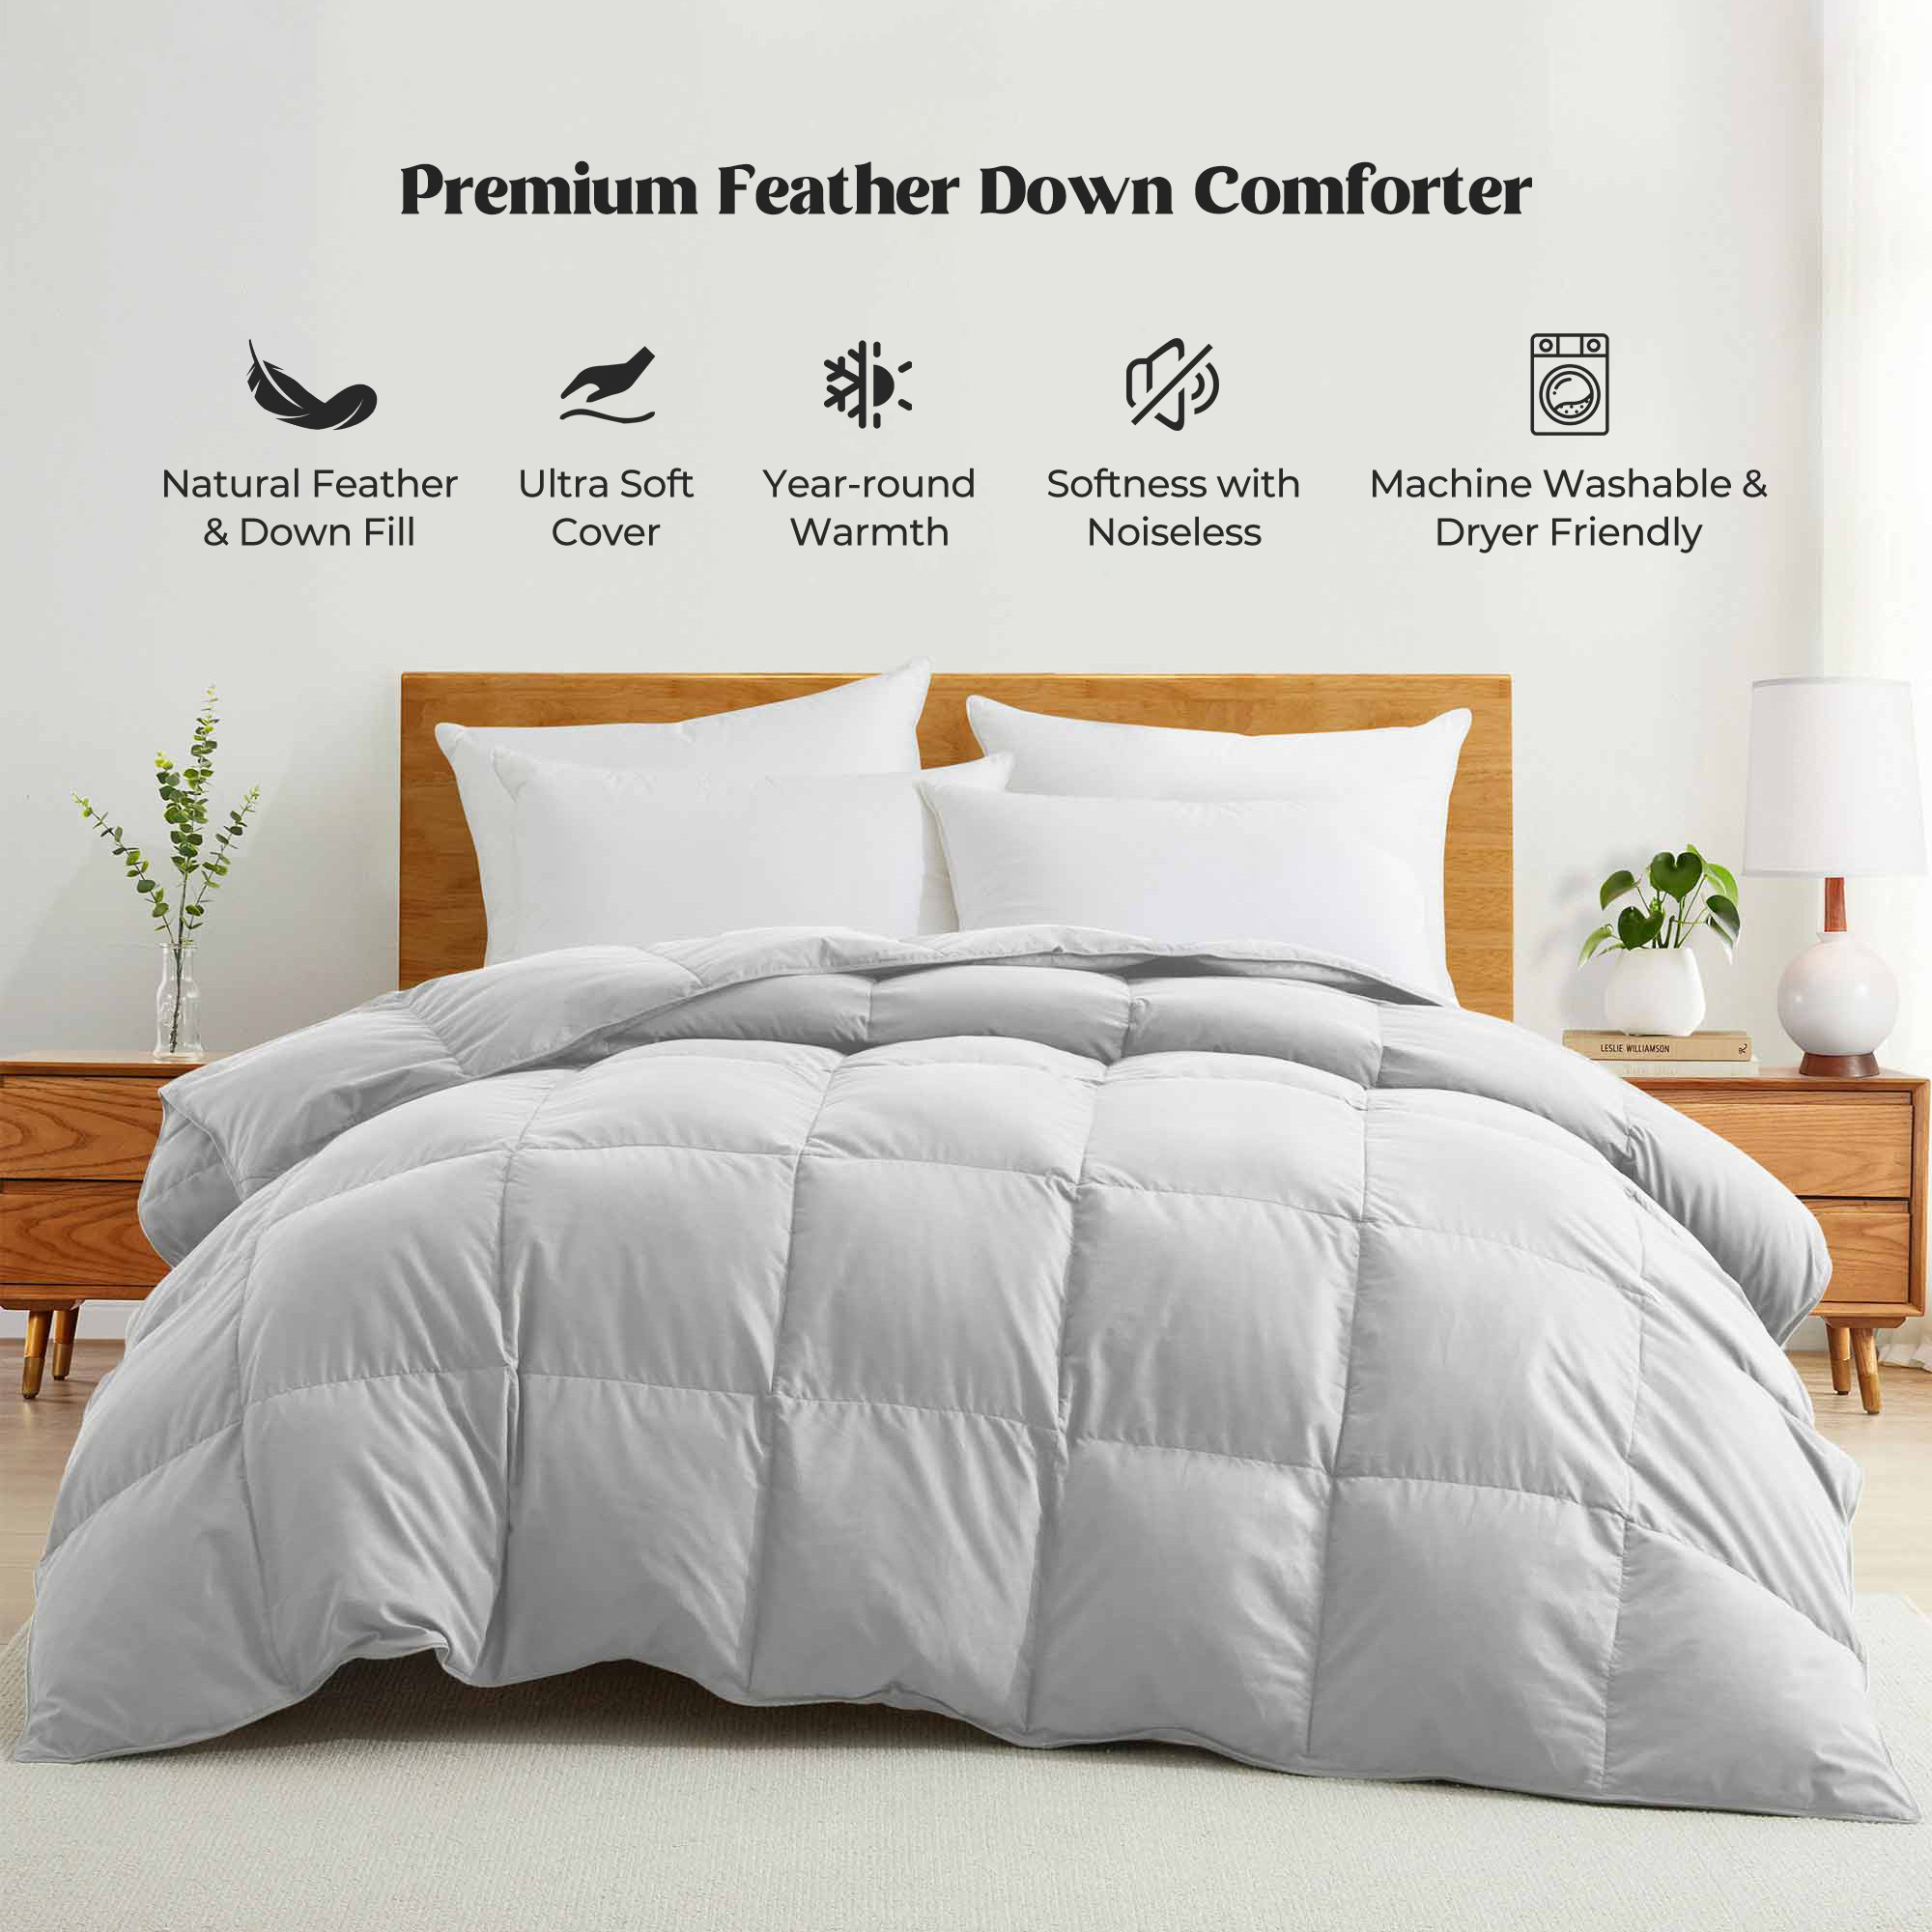 All Seasons Goose Down Feather Comforter Ultra Soft Comforter With Peach Skin Fabric - Nimbus Cloud, Twin-68*88